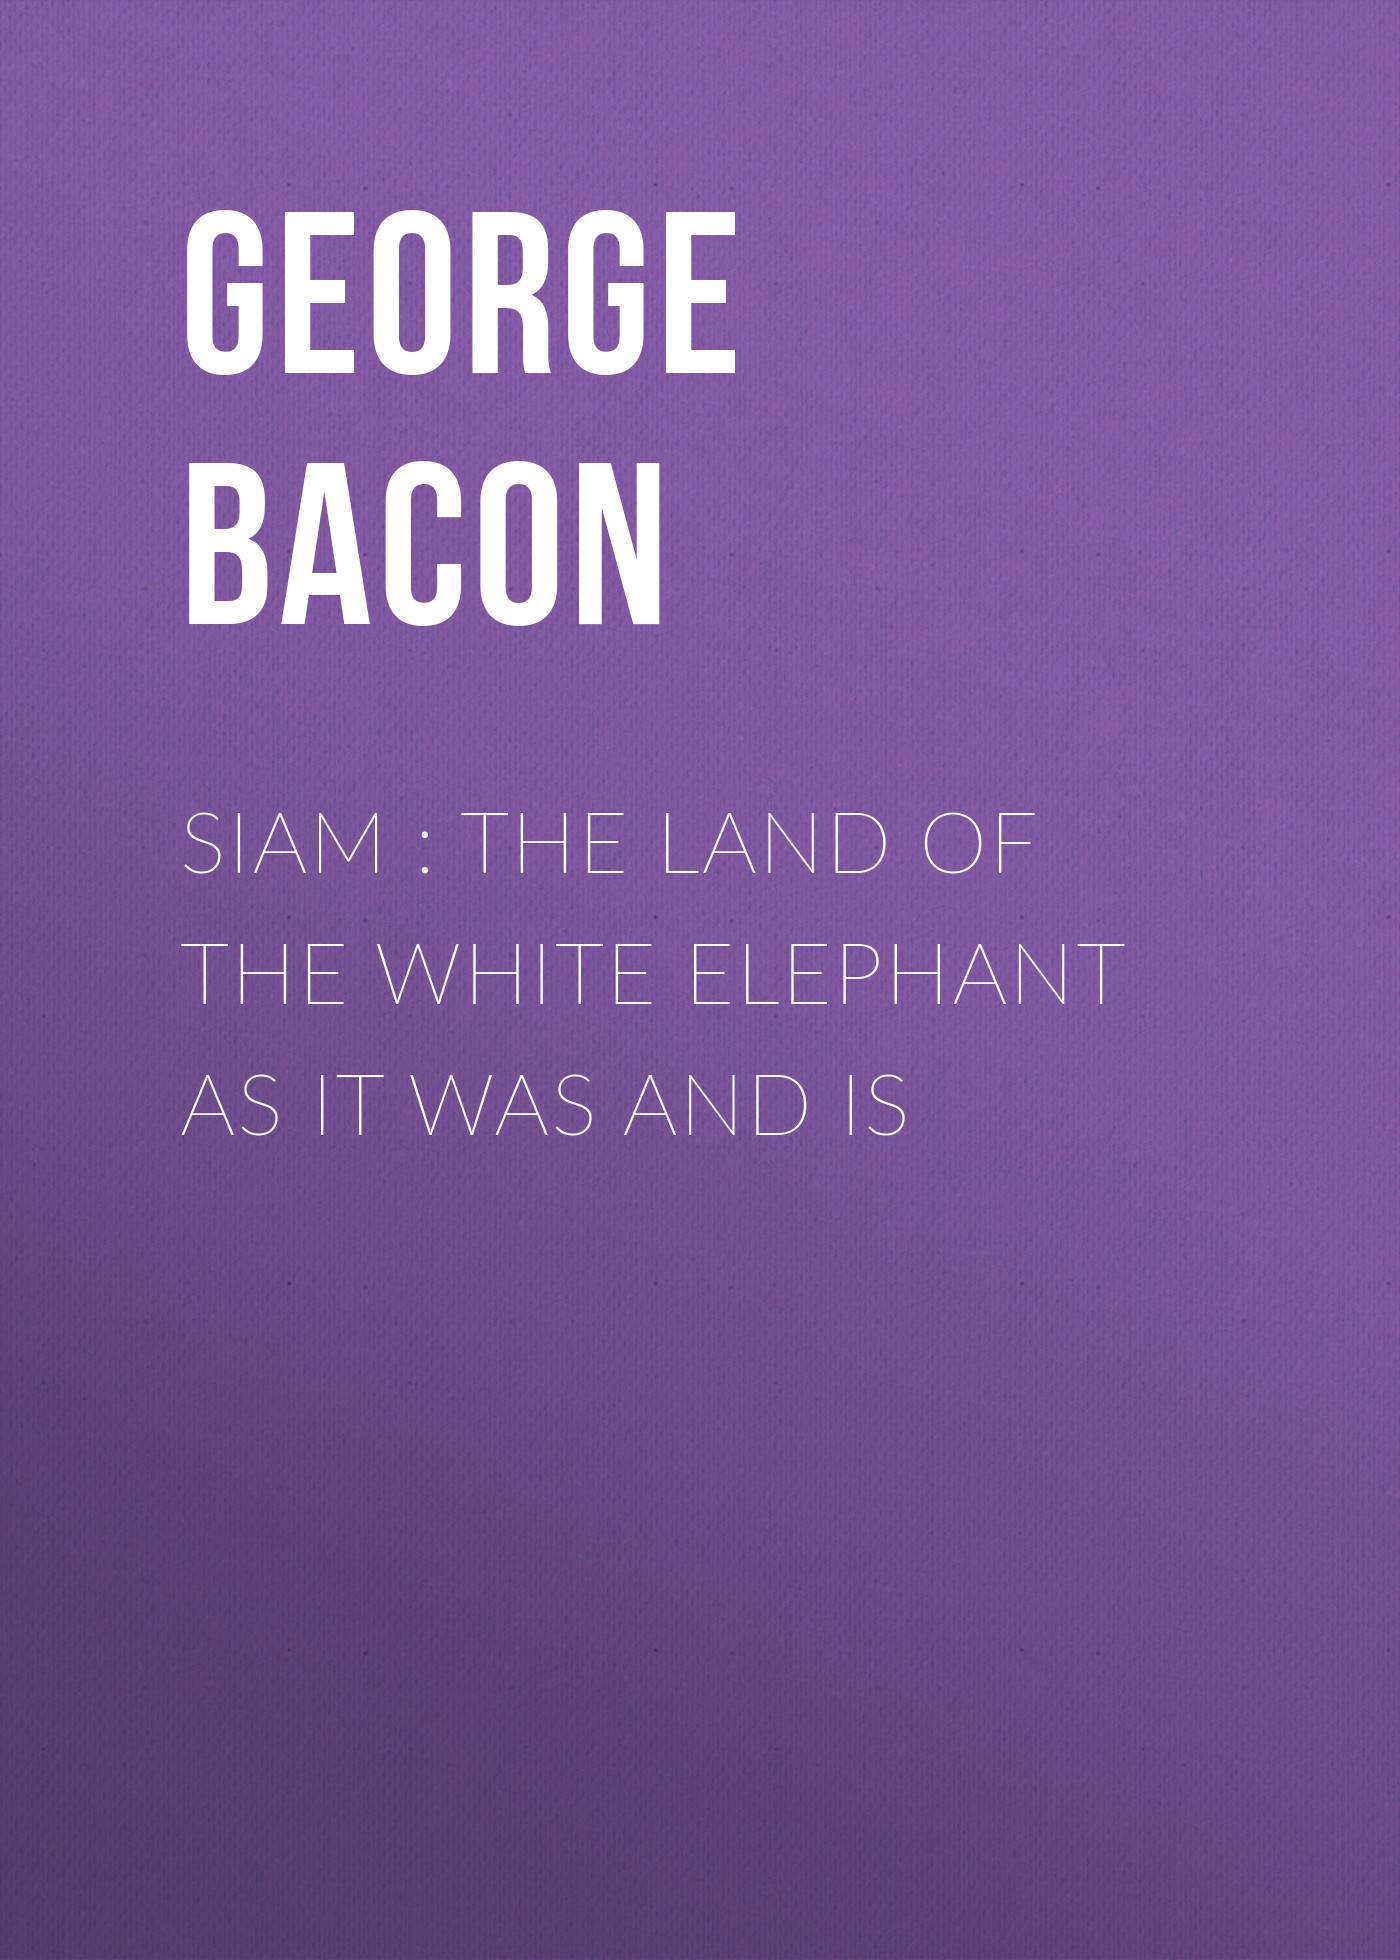 Siam : The Land of the White Elephant as It Was and Is